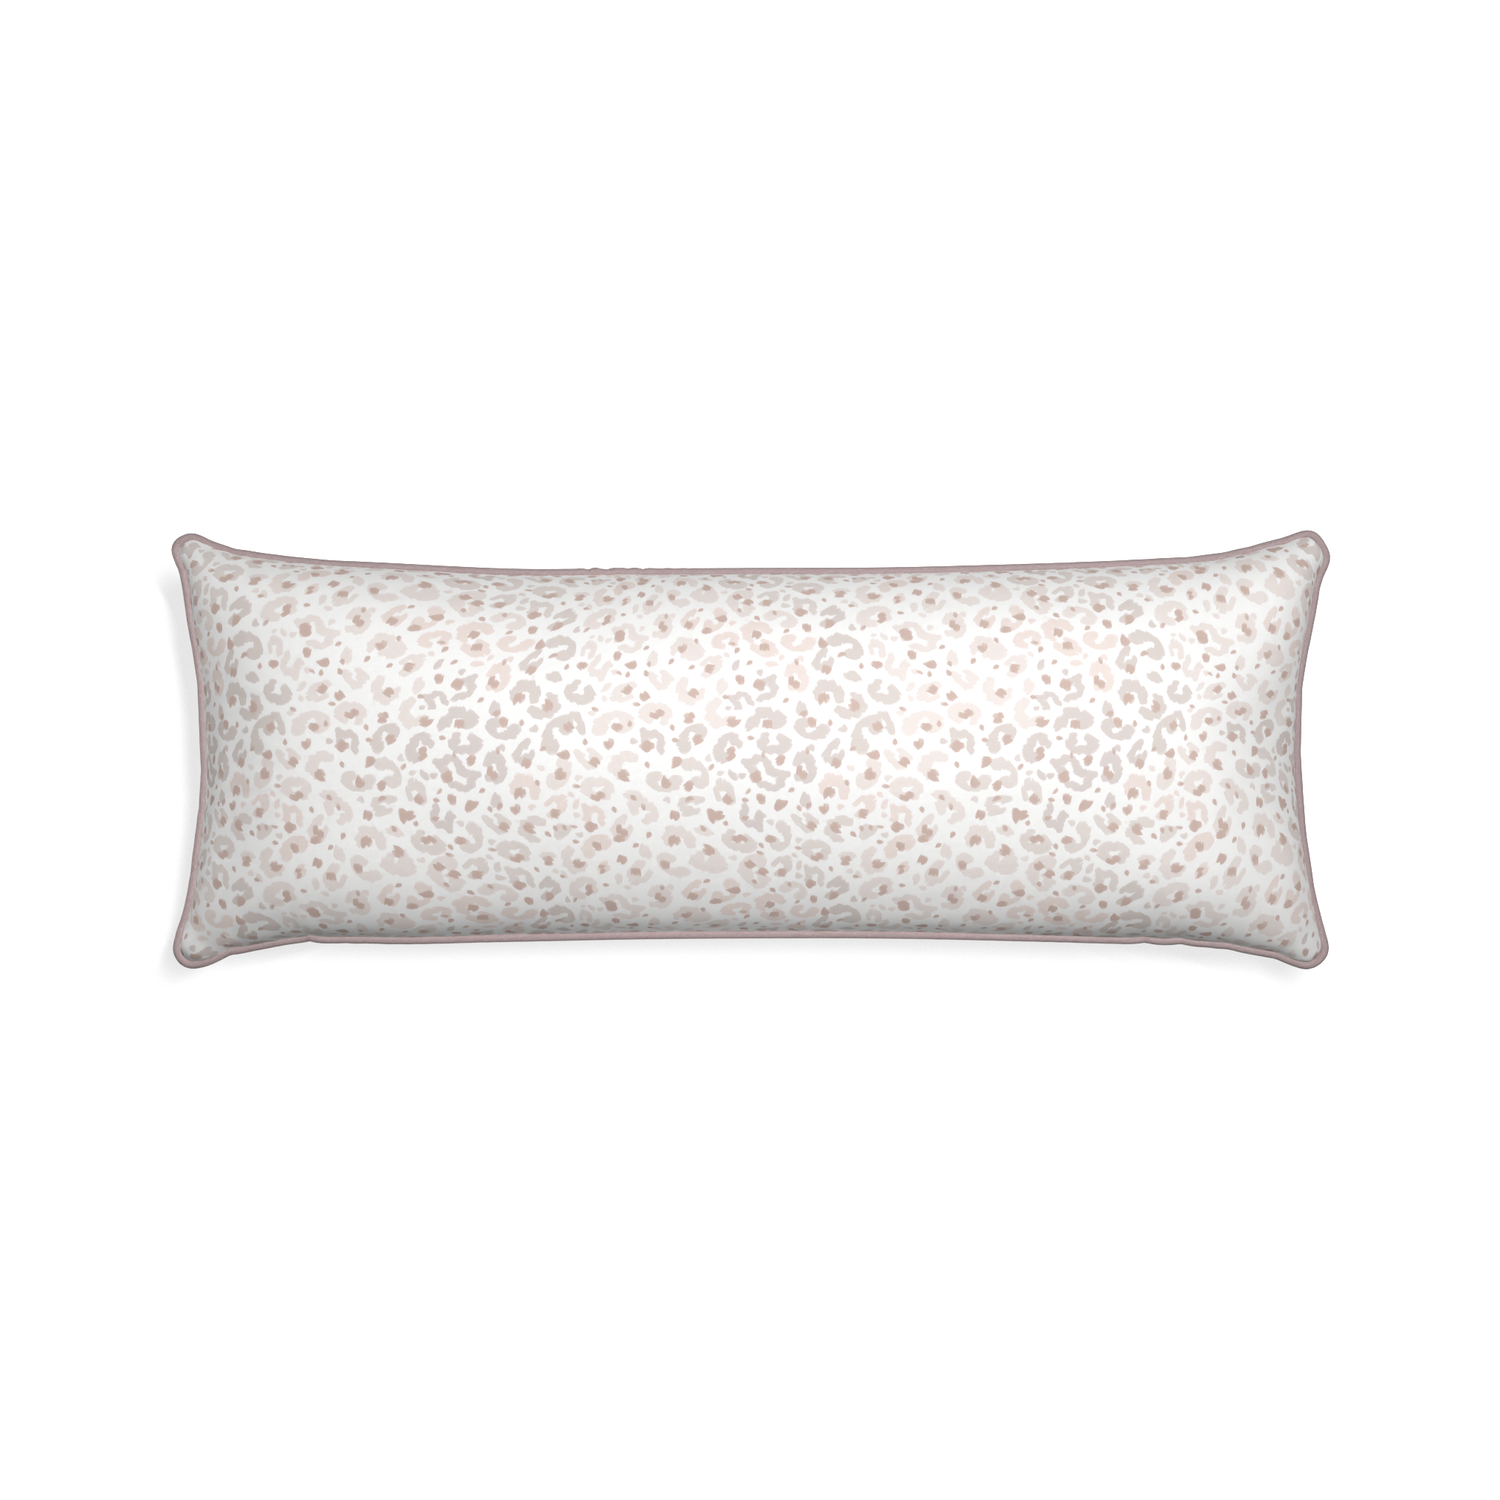 Xl-lumbar rosie custom beige animal printpillow with orchid piping on white background